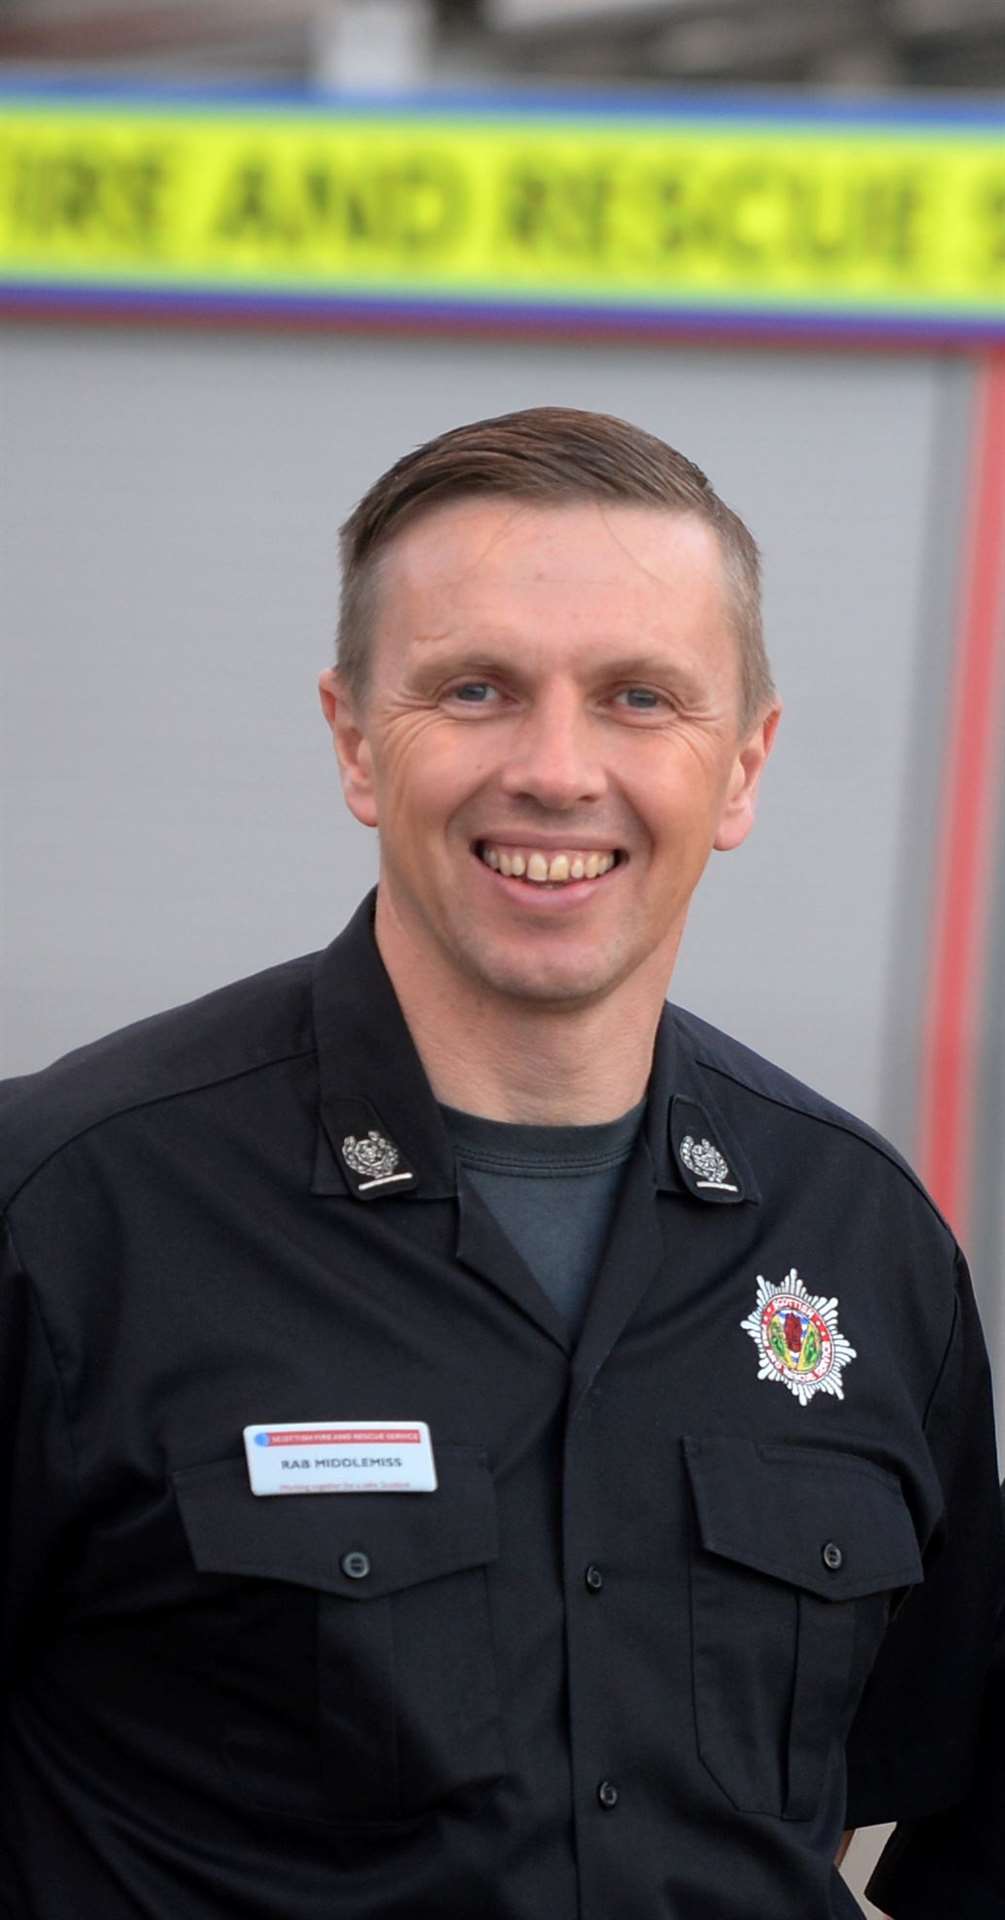 Rab Middlemiss, SFRS local senior officer for the Highlands.